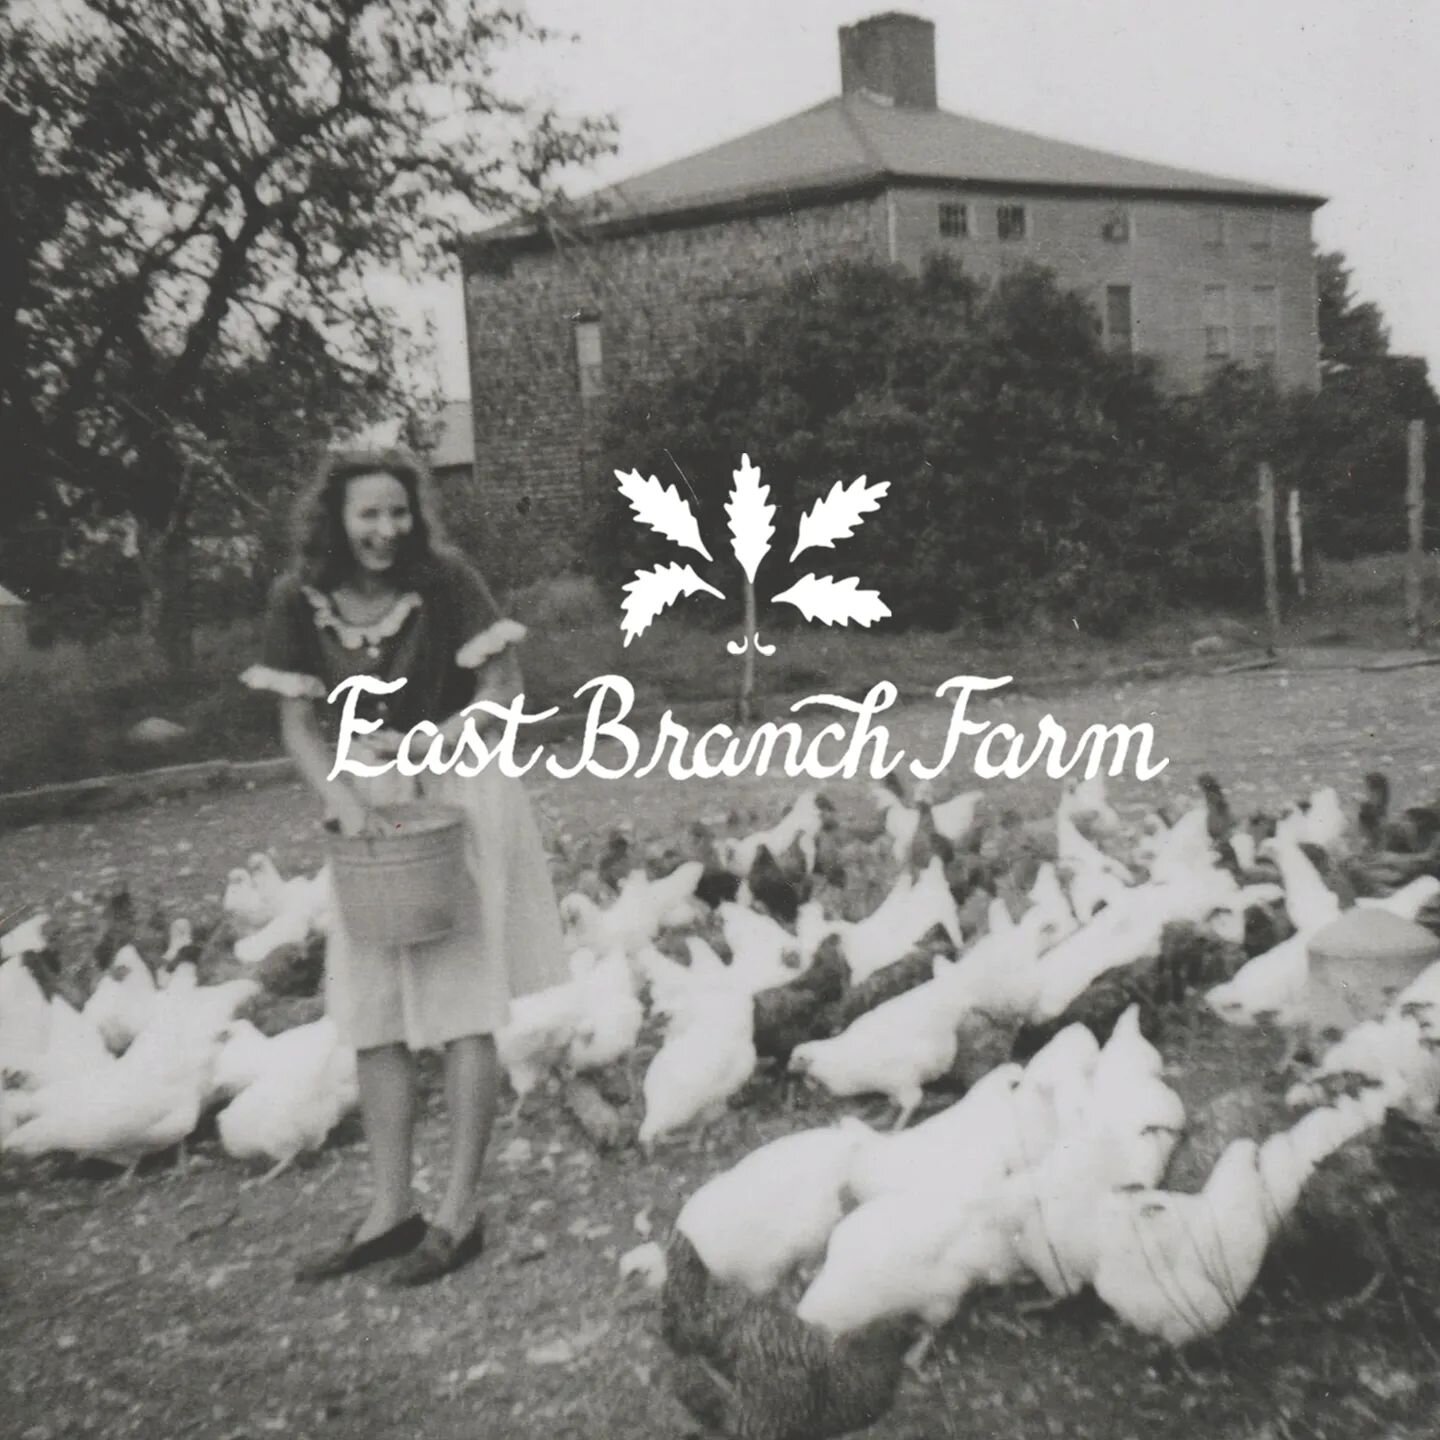 Thank you so much to @eastbranchfarm, located in South&nbsp;Durham, for their generous donation to the Durham Historical Society. We are so grateful to you!&nbsp;

East Branch Farm is a&nbsp;MOFGA Certified Organic, regenerative family farm located a